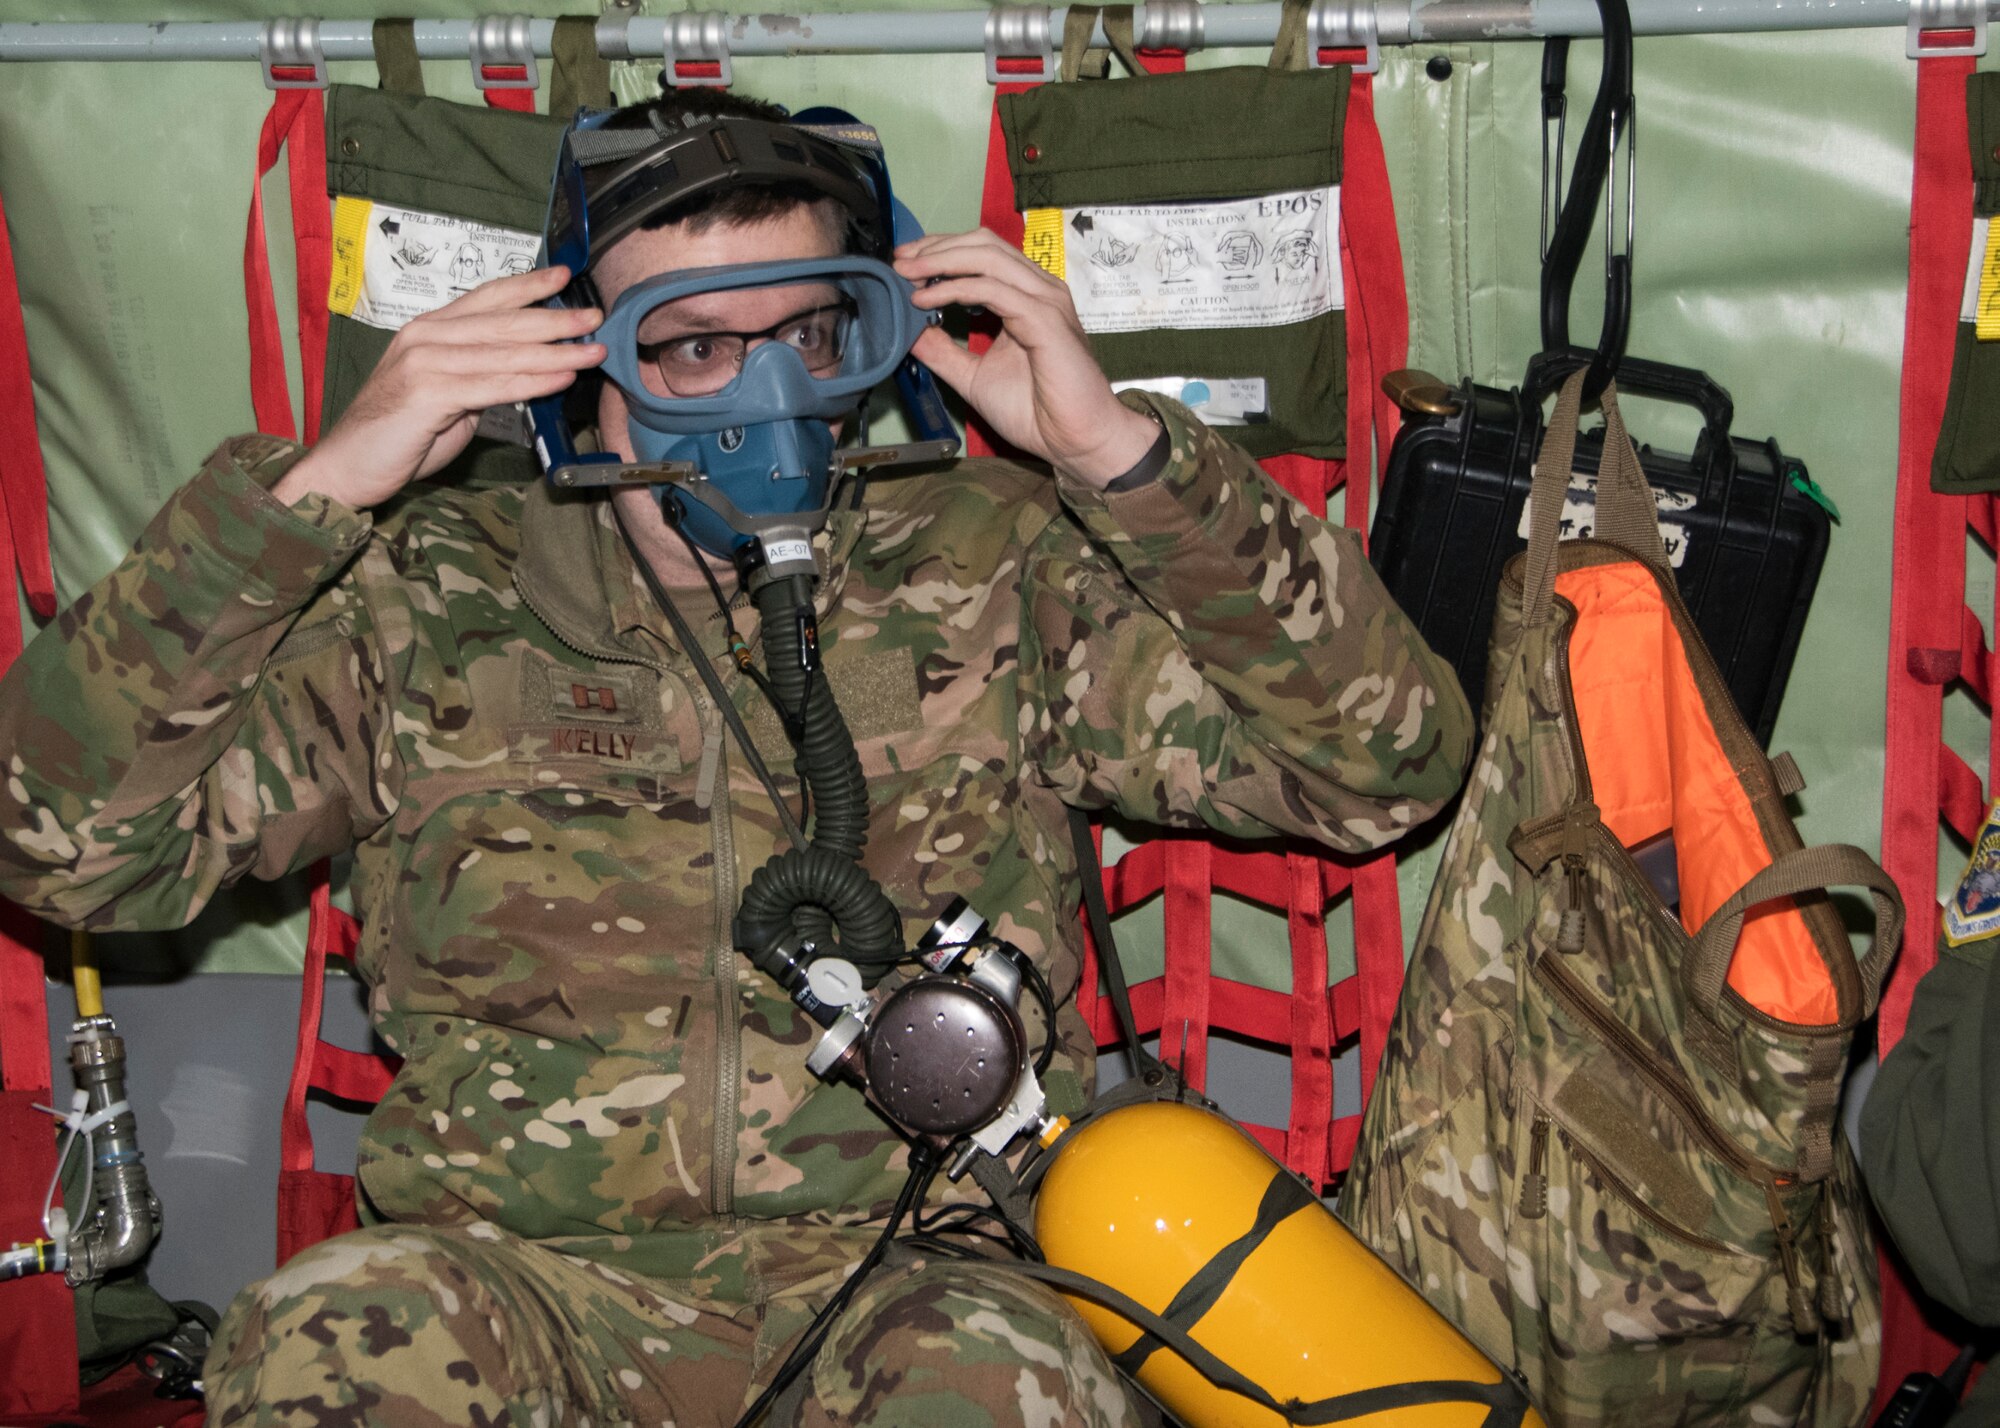 Capt. Ryan Kelly, 459 Aeromedical Evacuation Squadron flight nurse, puts on his oxygen mask during an in-flight aircraft emergency, as part of the teams off station trainer Sept. 20, 2019. The AES team conducted training on a KC-135 Stratotanker during a flight to Wright Patterson, Ohio, where they later participated in the Air Force Marathon. (U.S. Air Force photo by Staff Sgt. Cierra Presentado/Released)